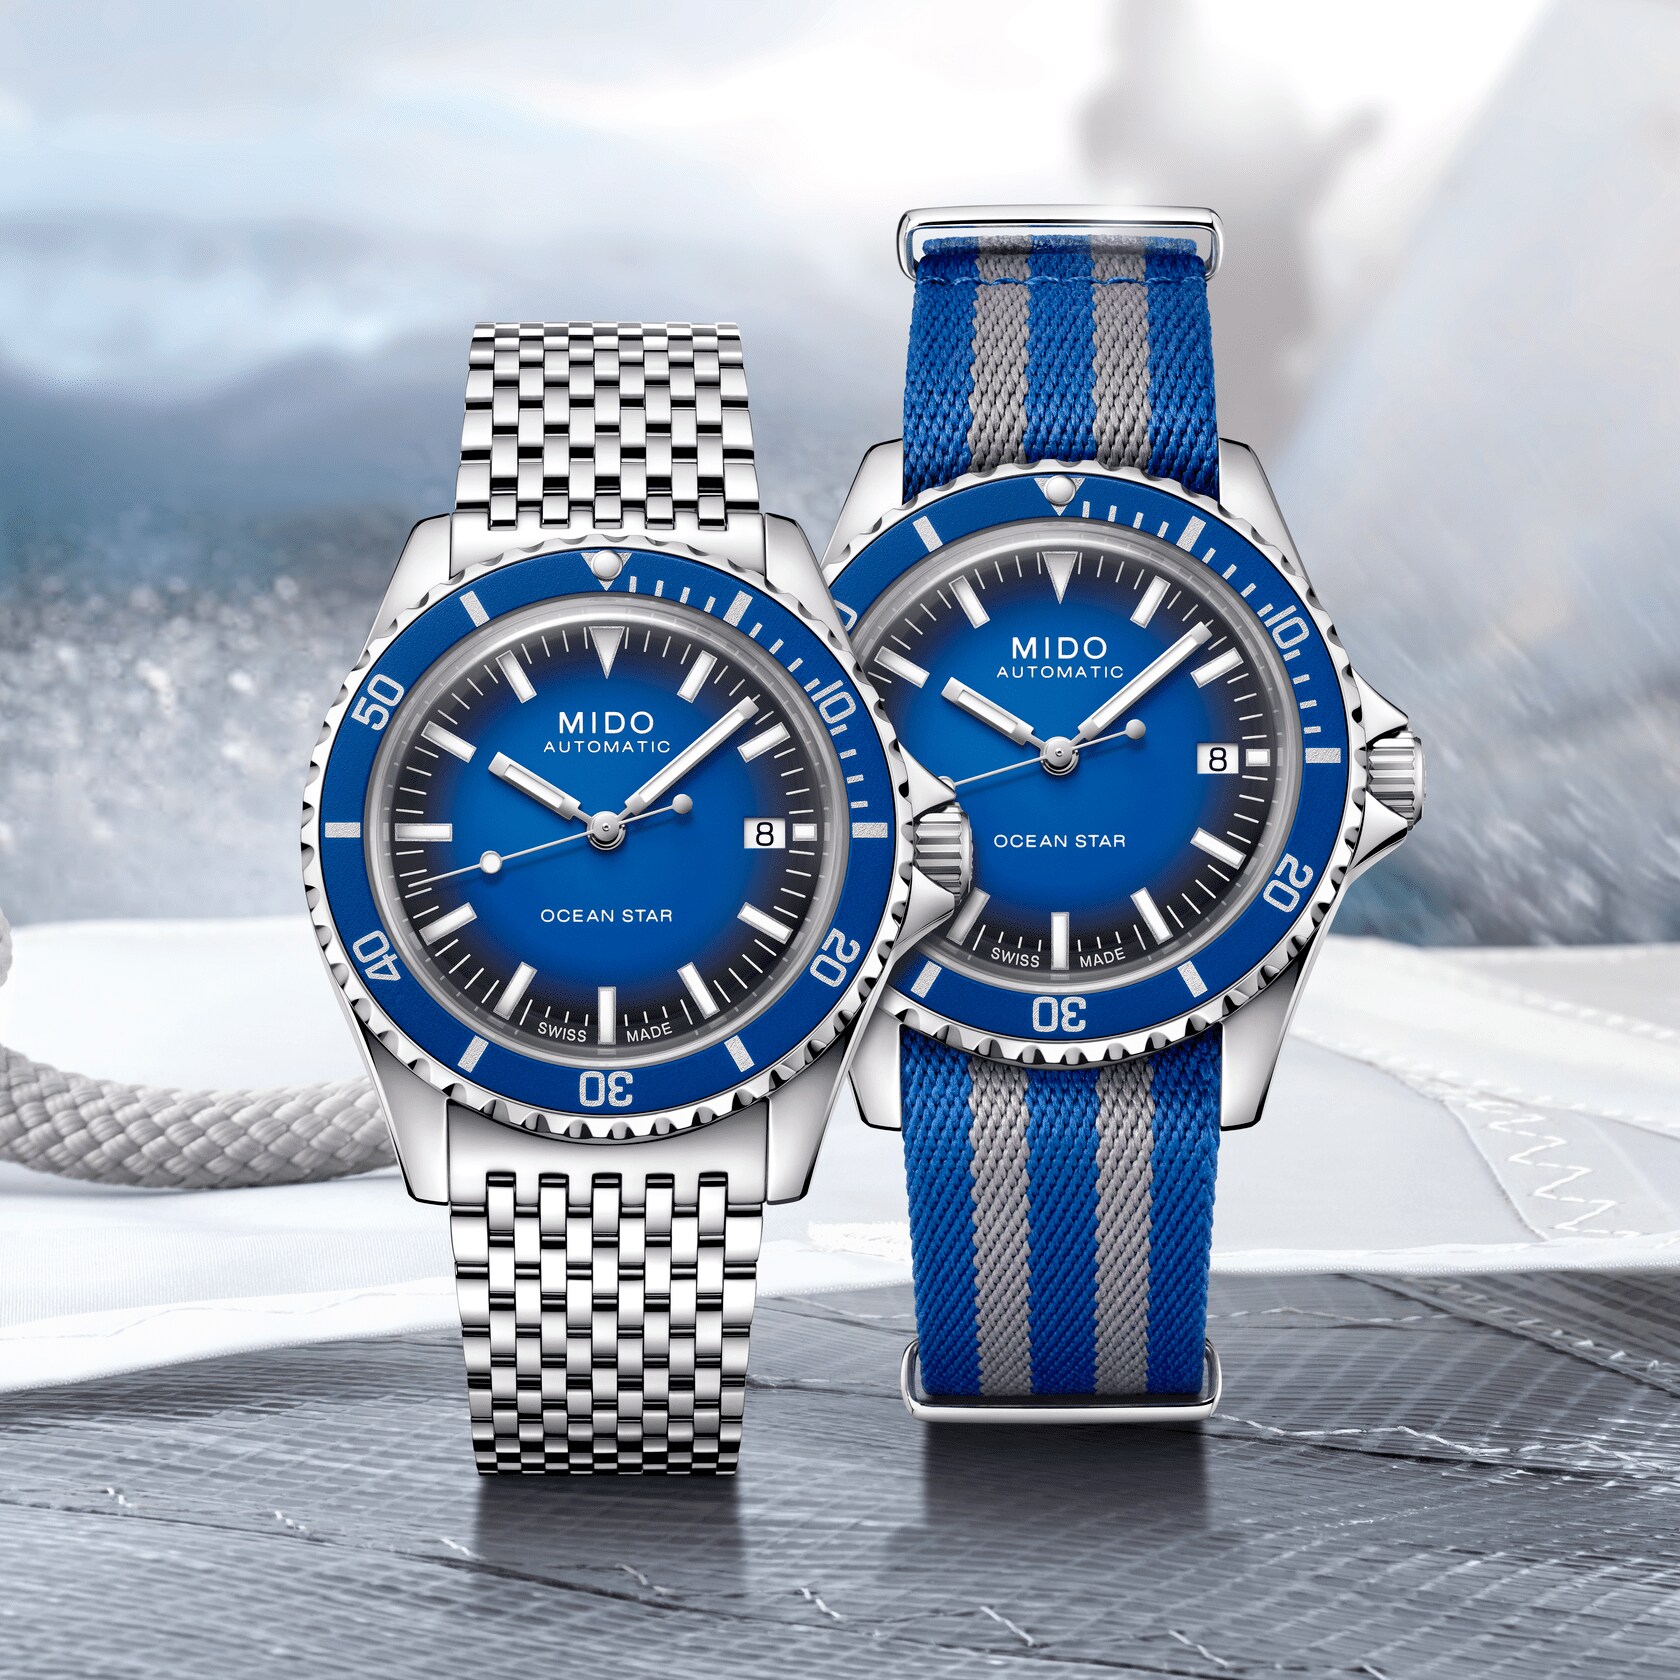 Mido Ocean Star Tribute Limited Edition Italy M026.807.11.041.00 Lifestyle combo